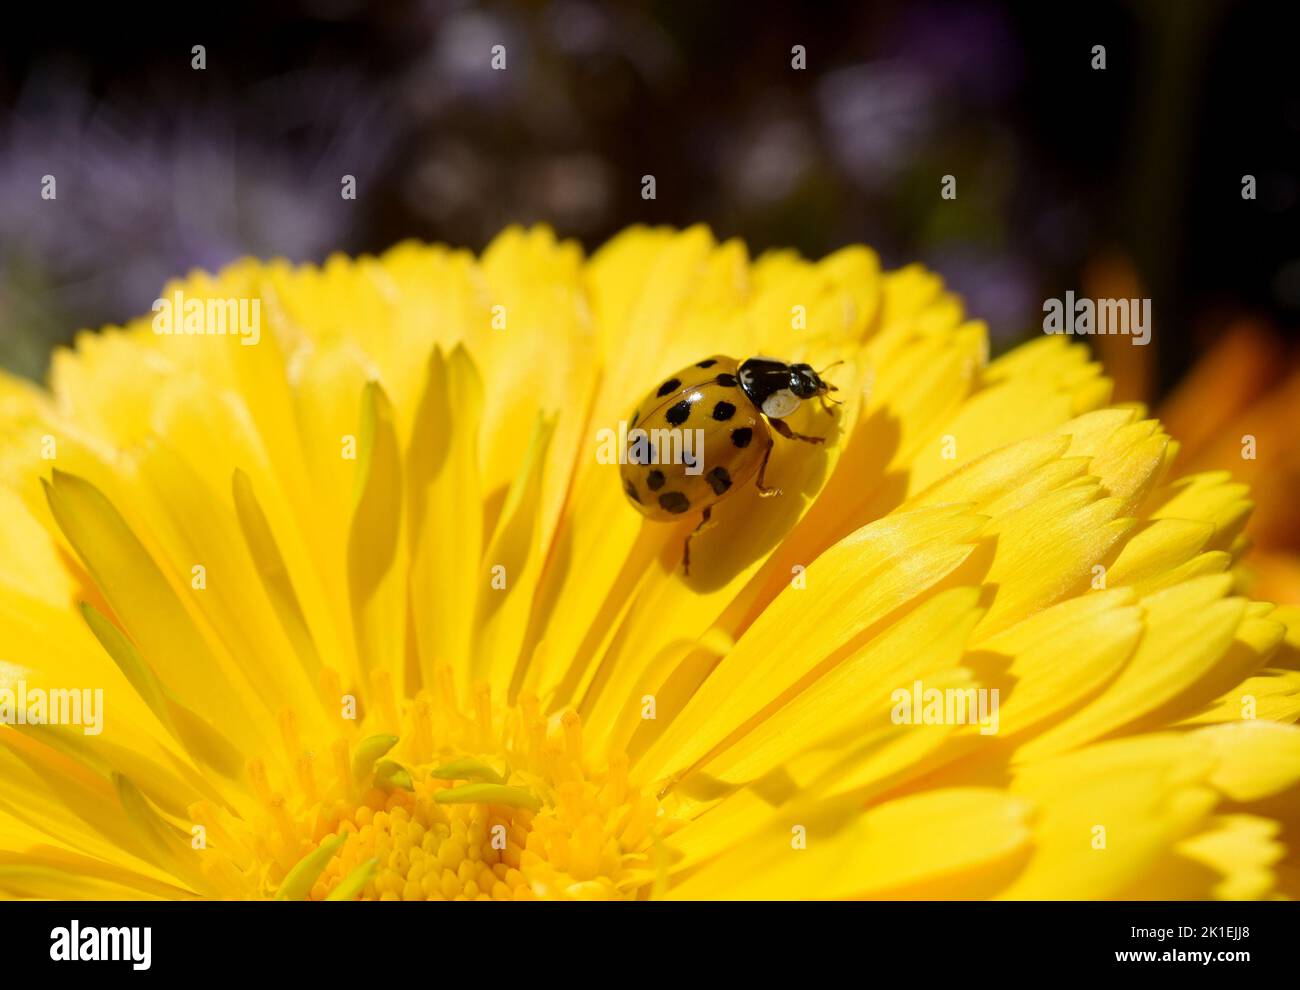 Asian ladybird, Harmonia axyrides, is a ladybird from the Asian region that comes in many colors and has a different number of spots, which is a serio Stock Photo